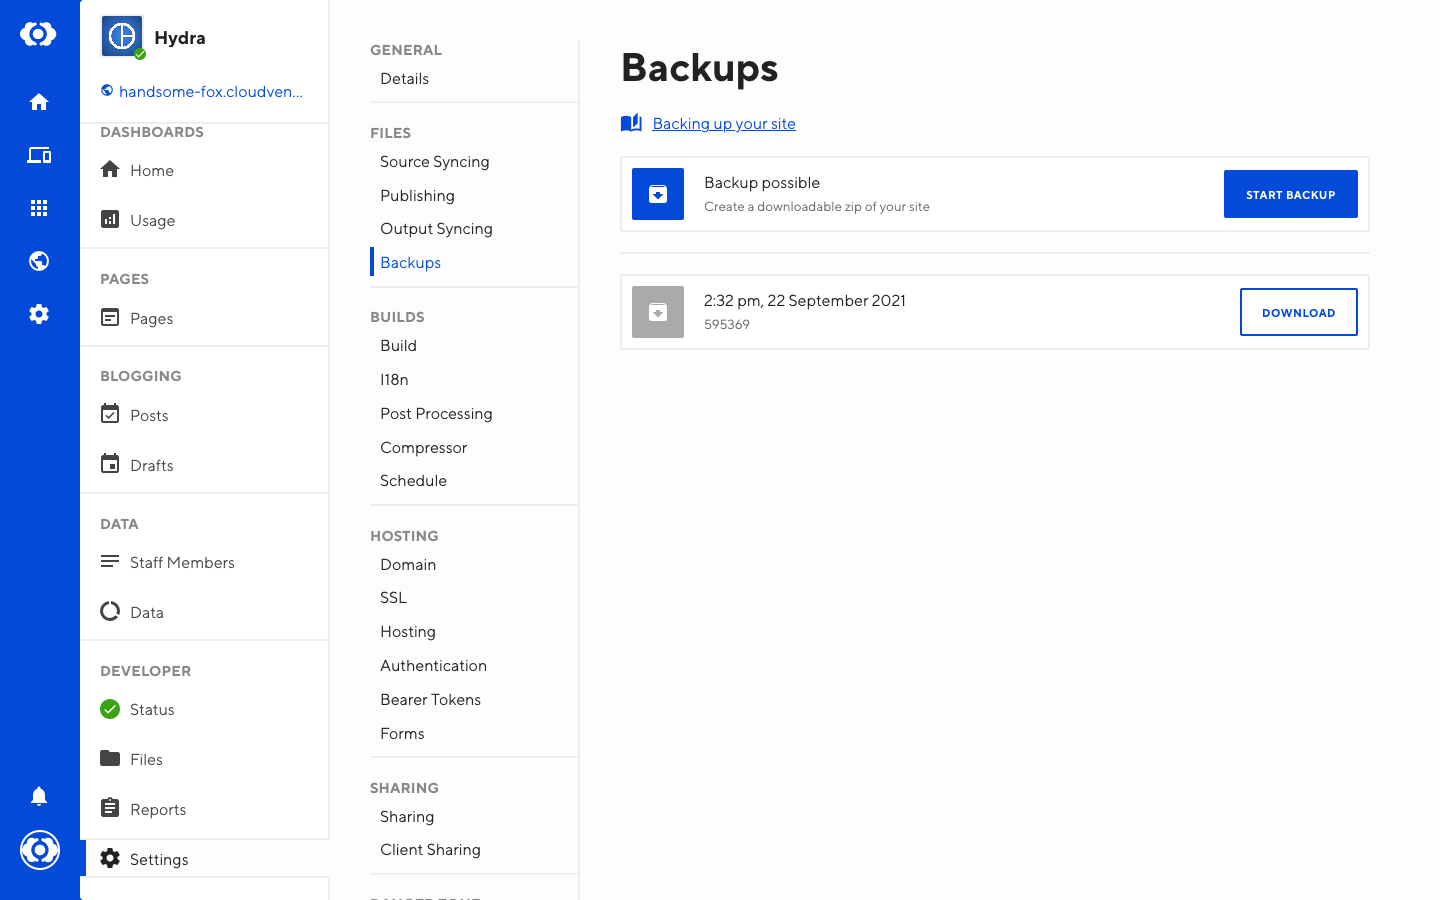 Starting a new backup from your source files and downloading backups from specified date time